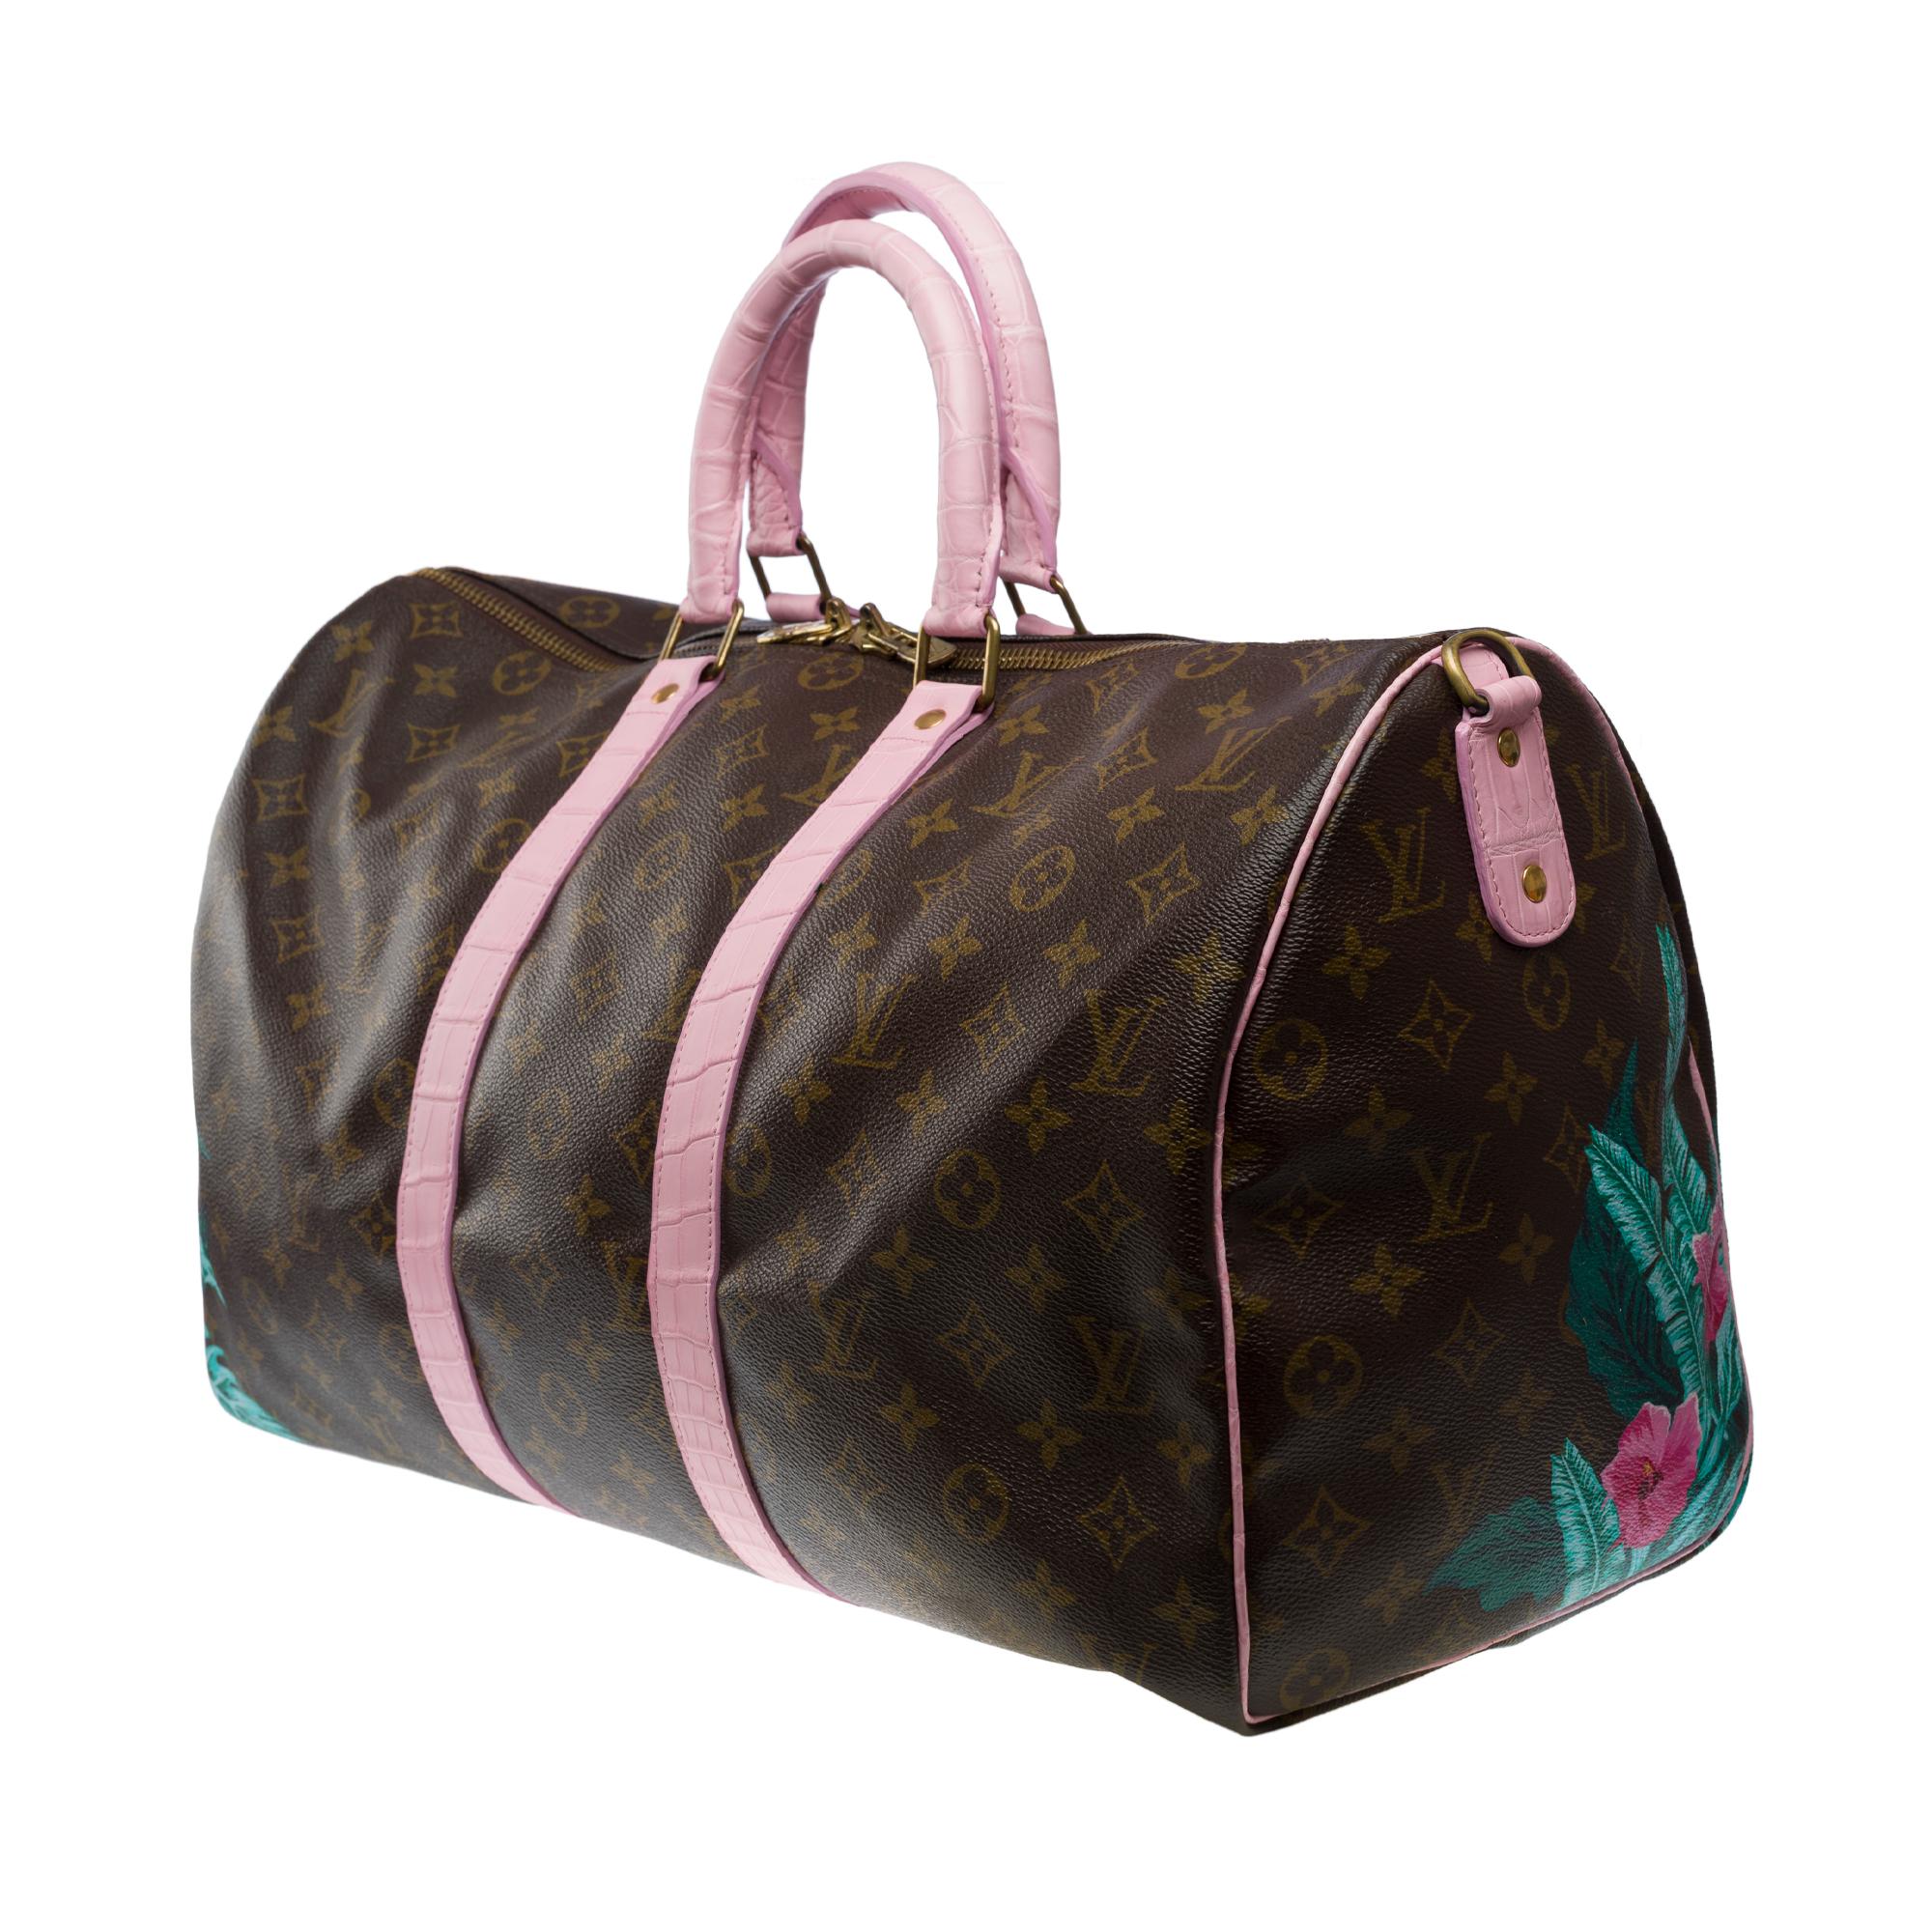 Customized Louis Vuitton Keepall 45 Travel bag with Pink Crocodile leather For Sale 1